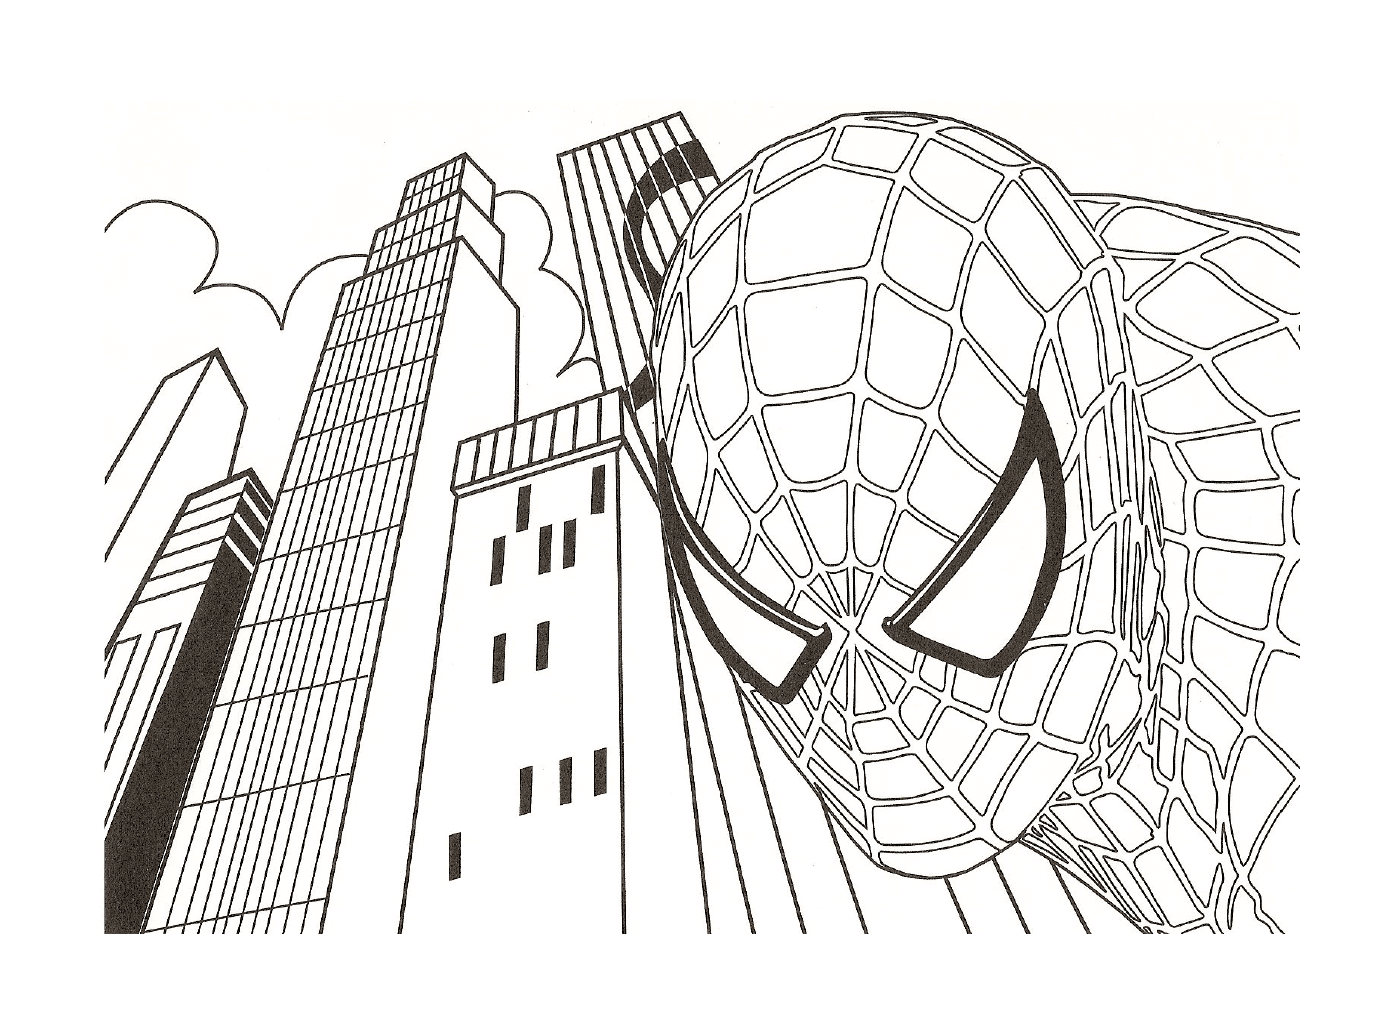  Spider-Man in the city 